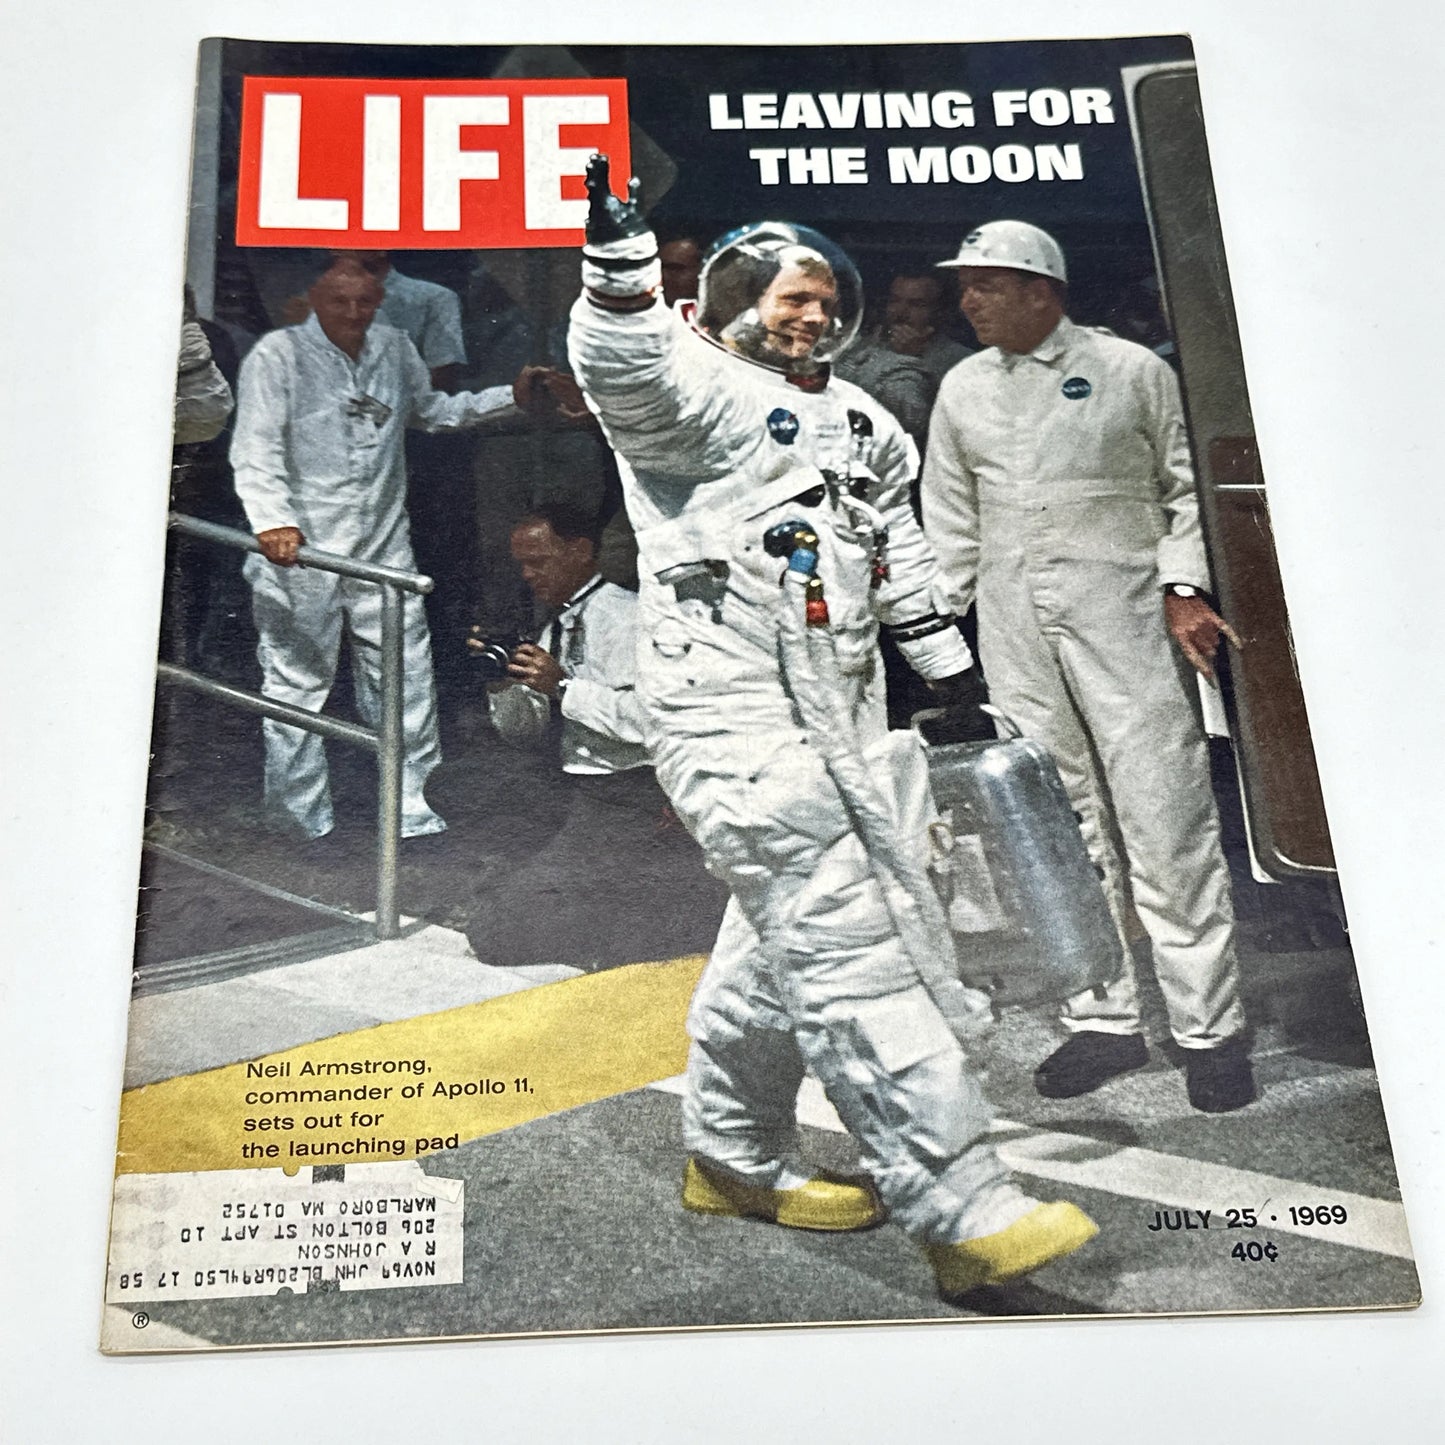 Apollo 12 Moon Landing as reported by LIFE Magazine